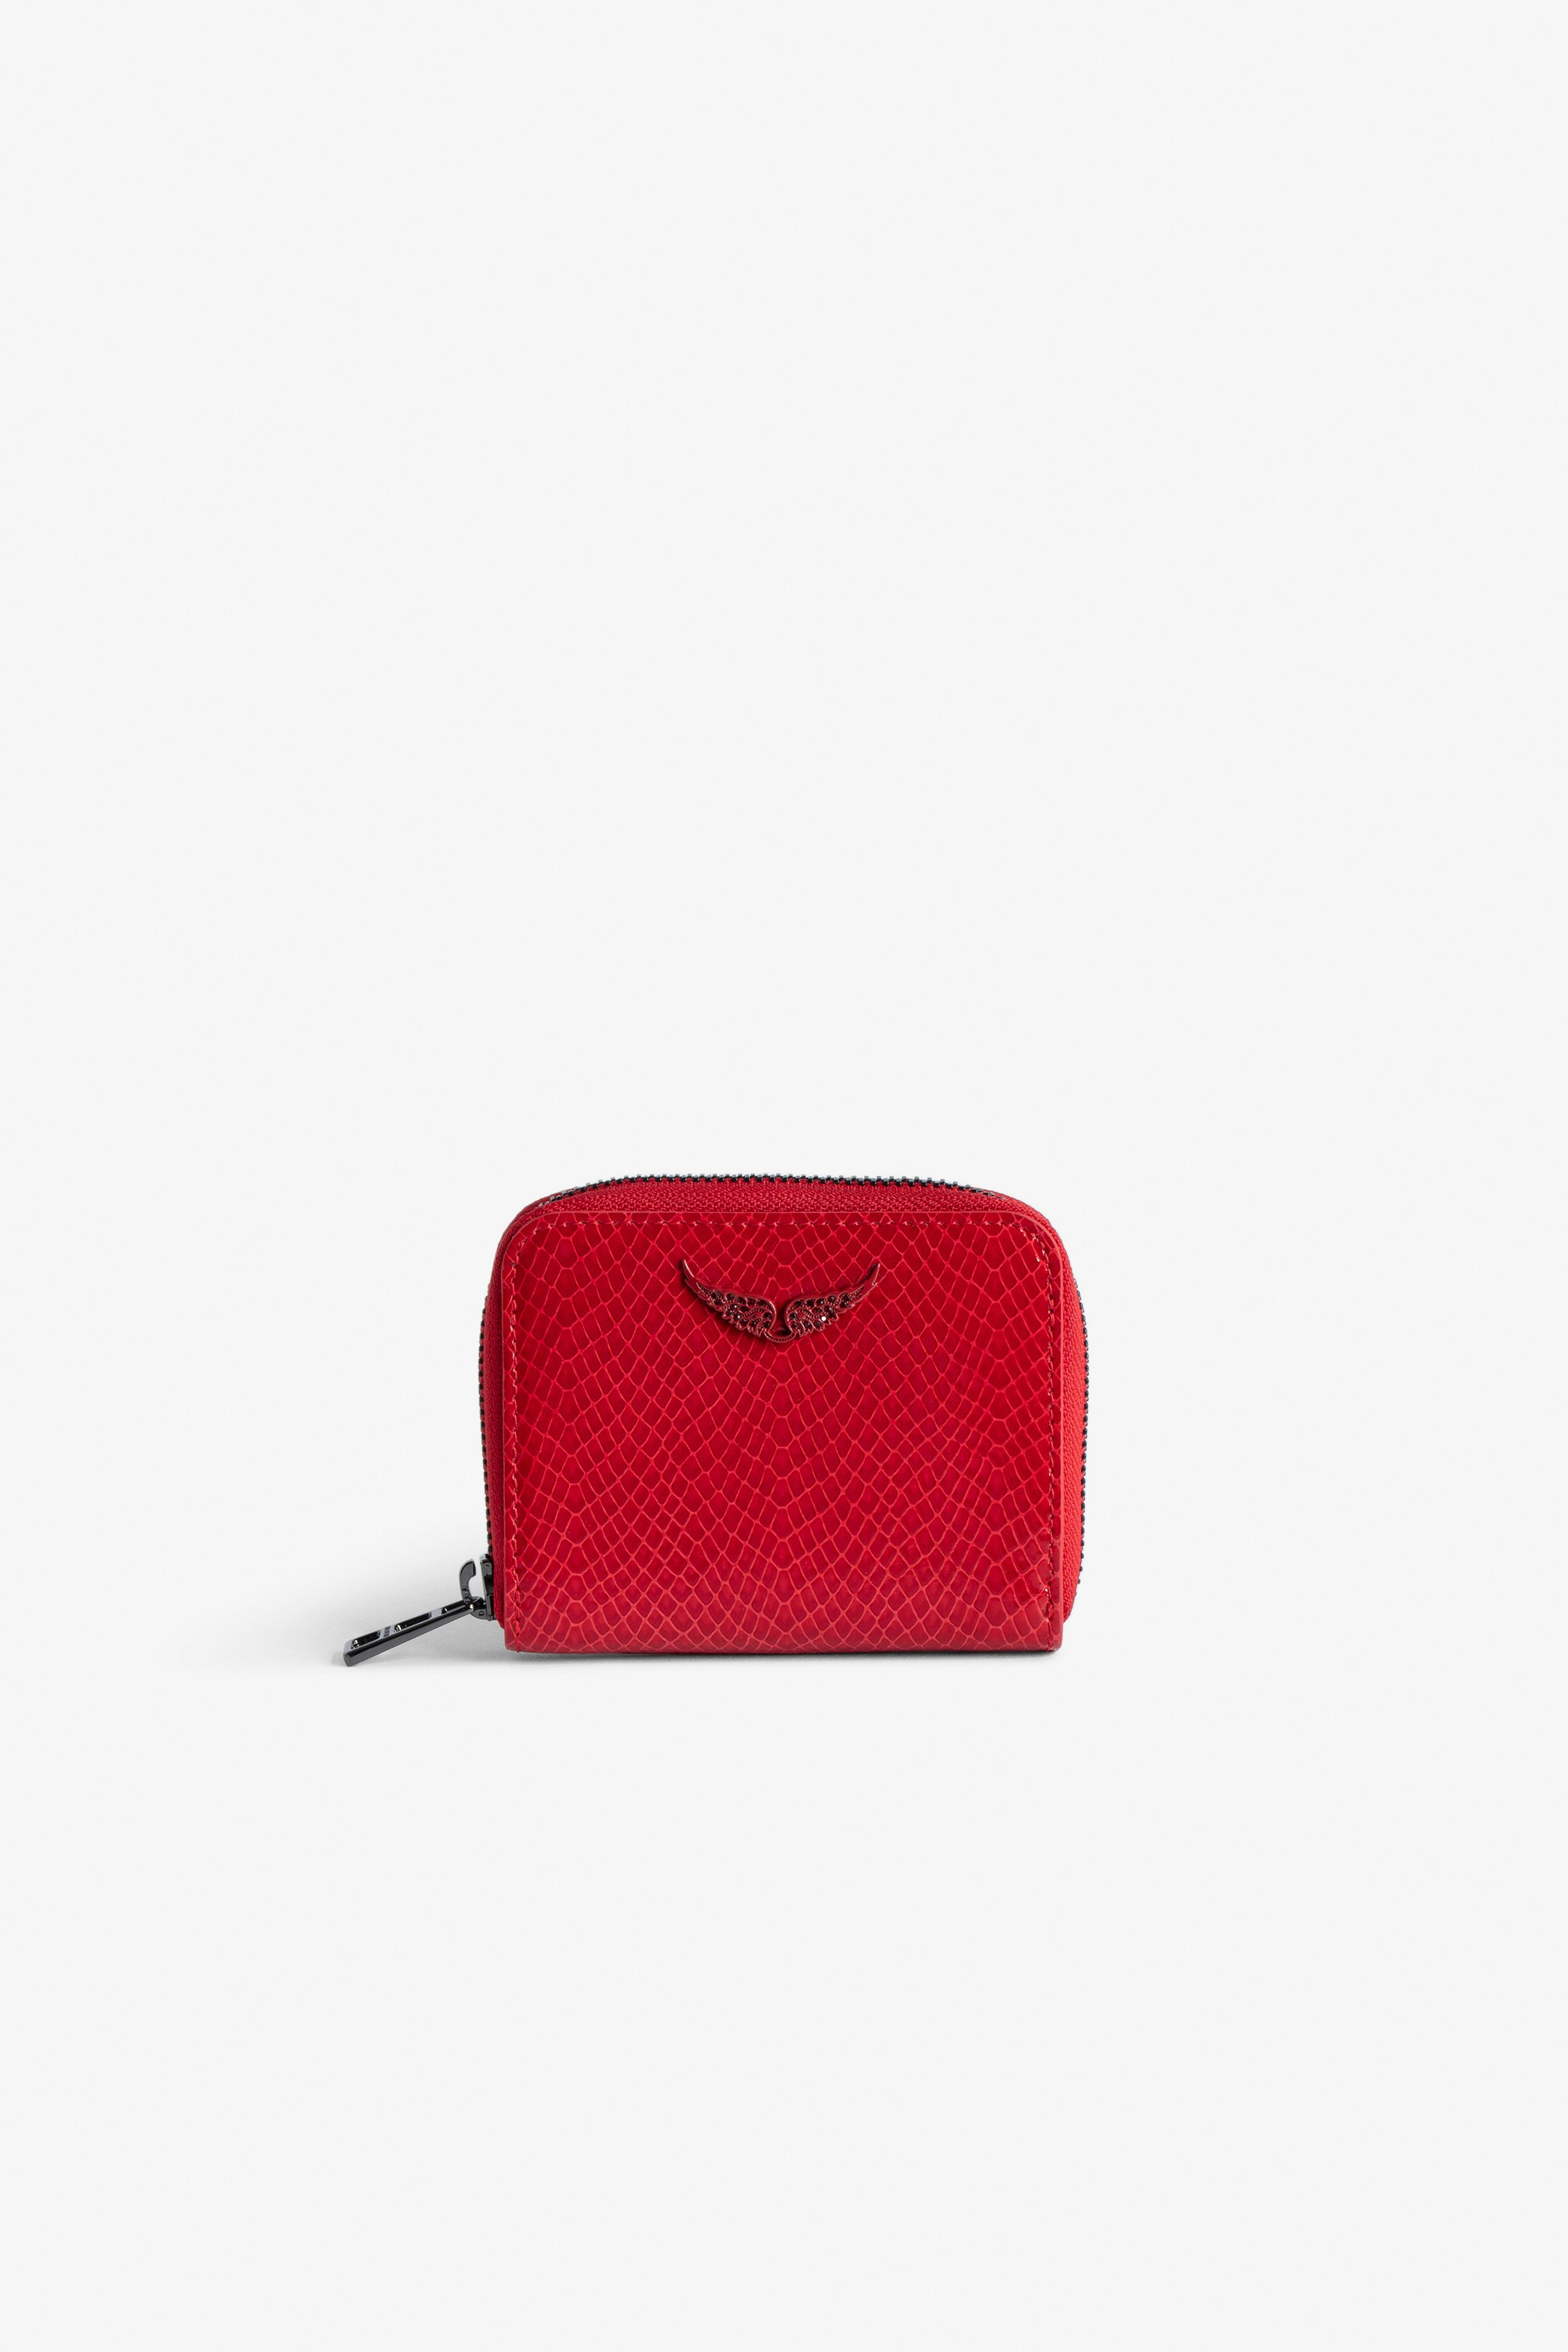 Mini ZV Glossy Wild Embossed Coin Purse - Women’s red python-effect patent leather clutch with wings charm.